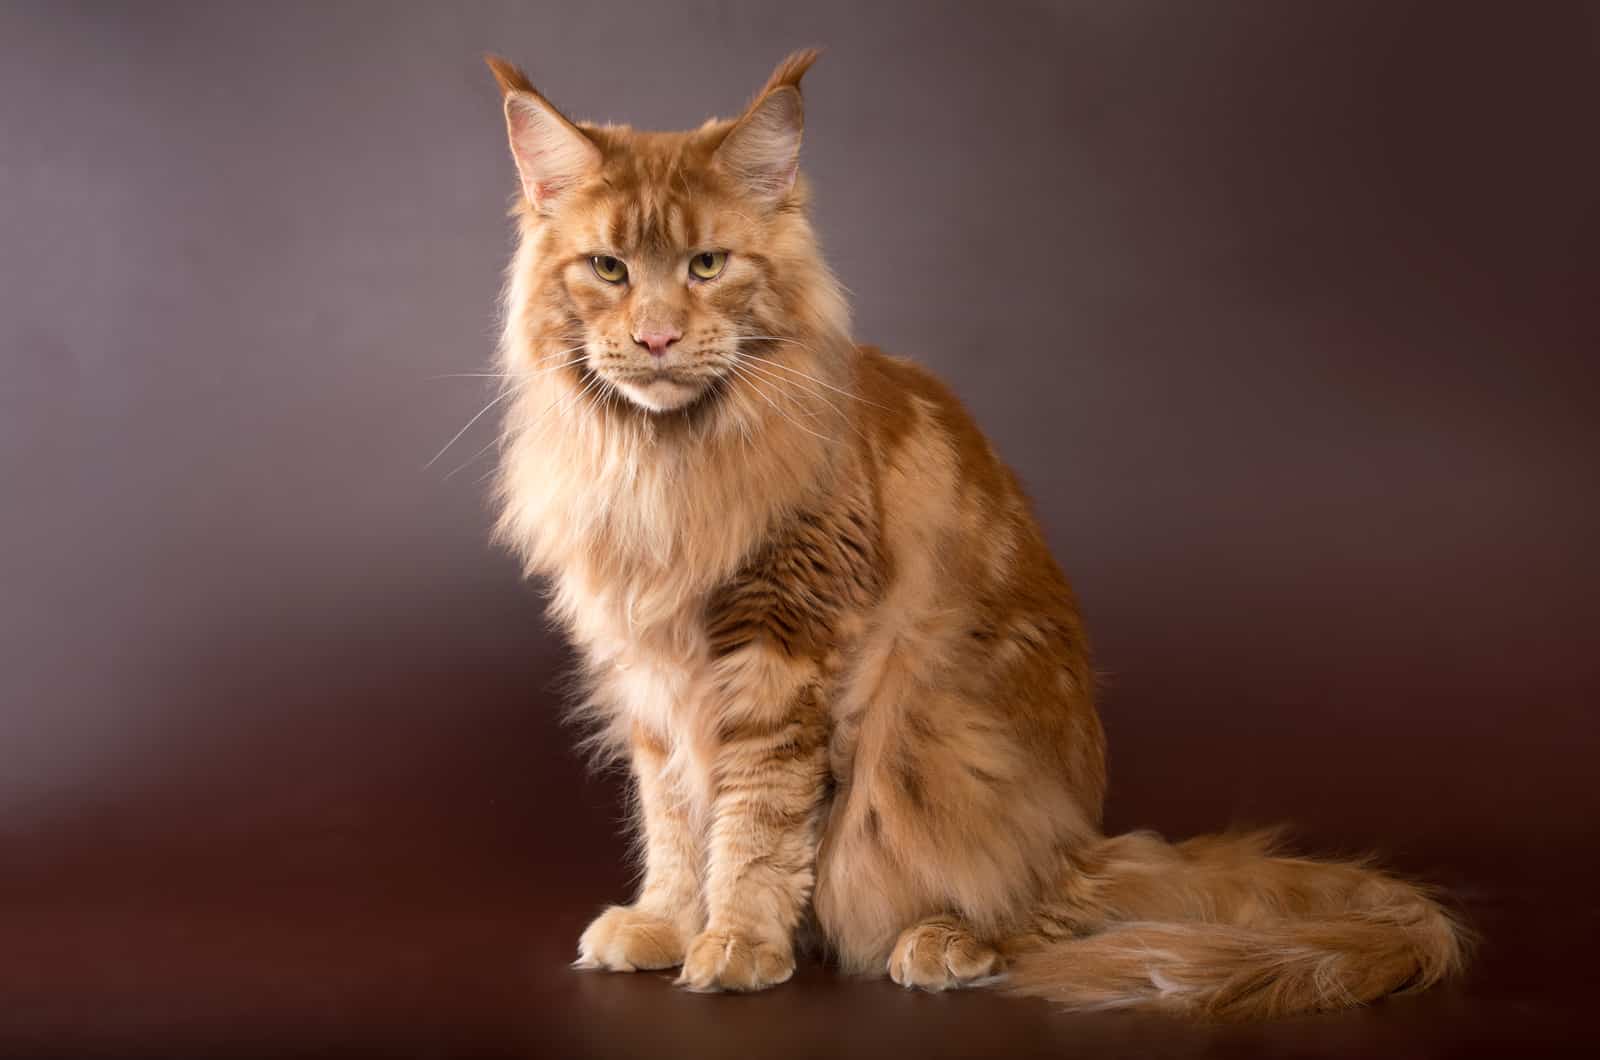 Maine Coon cat on a brown background 